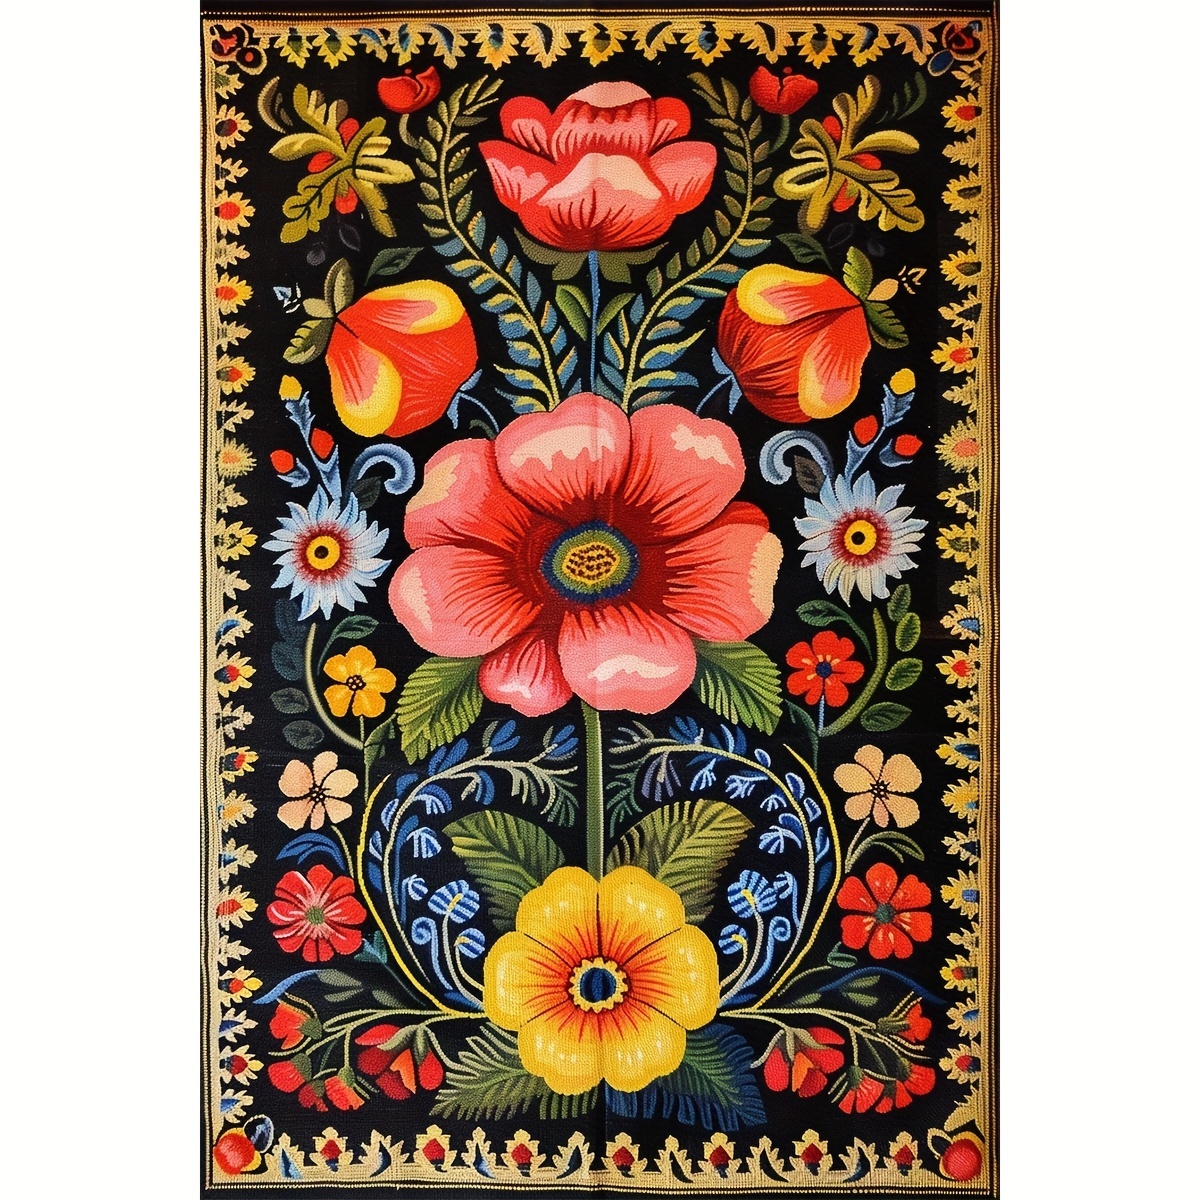 

1pc Cross Stitch Kit: 40 X 55cm/15.7 X 21.7in, Vibrant Floral Design, Includes Printed Chart, Aida Cloth, Threads, Needles & Instructions - Suitable For All Seasons